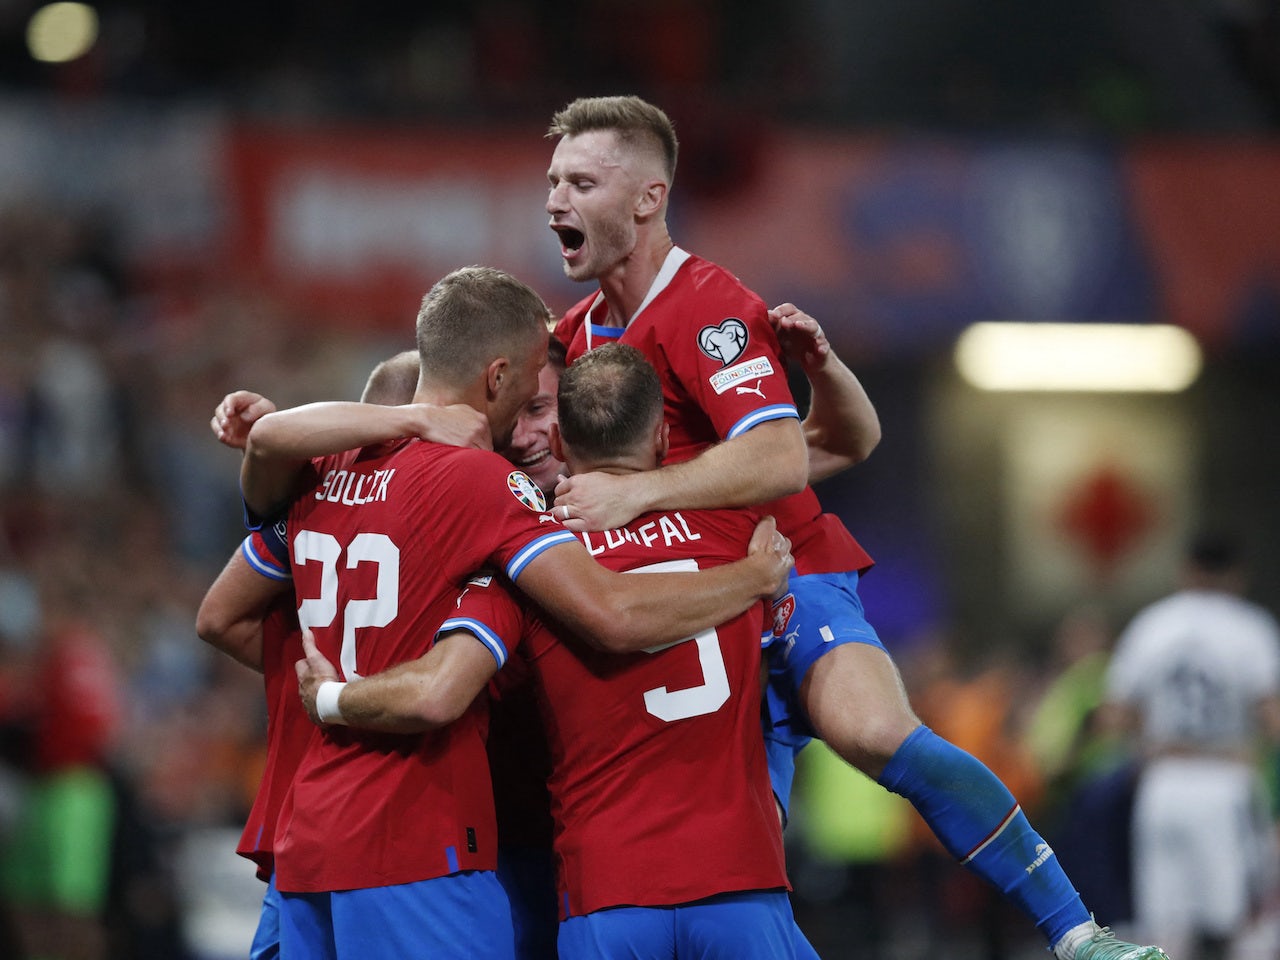 Sports Mole previews Tuesday's friendly clash between Czech Republic and Armenia, including predictions, team news and possible lineups.